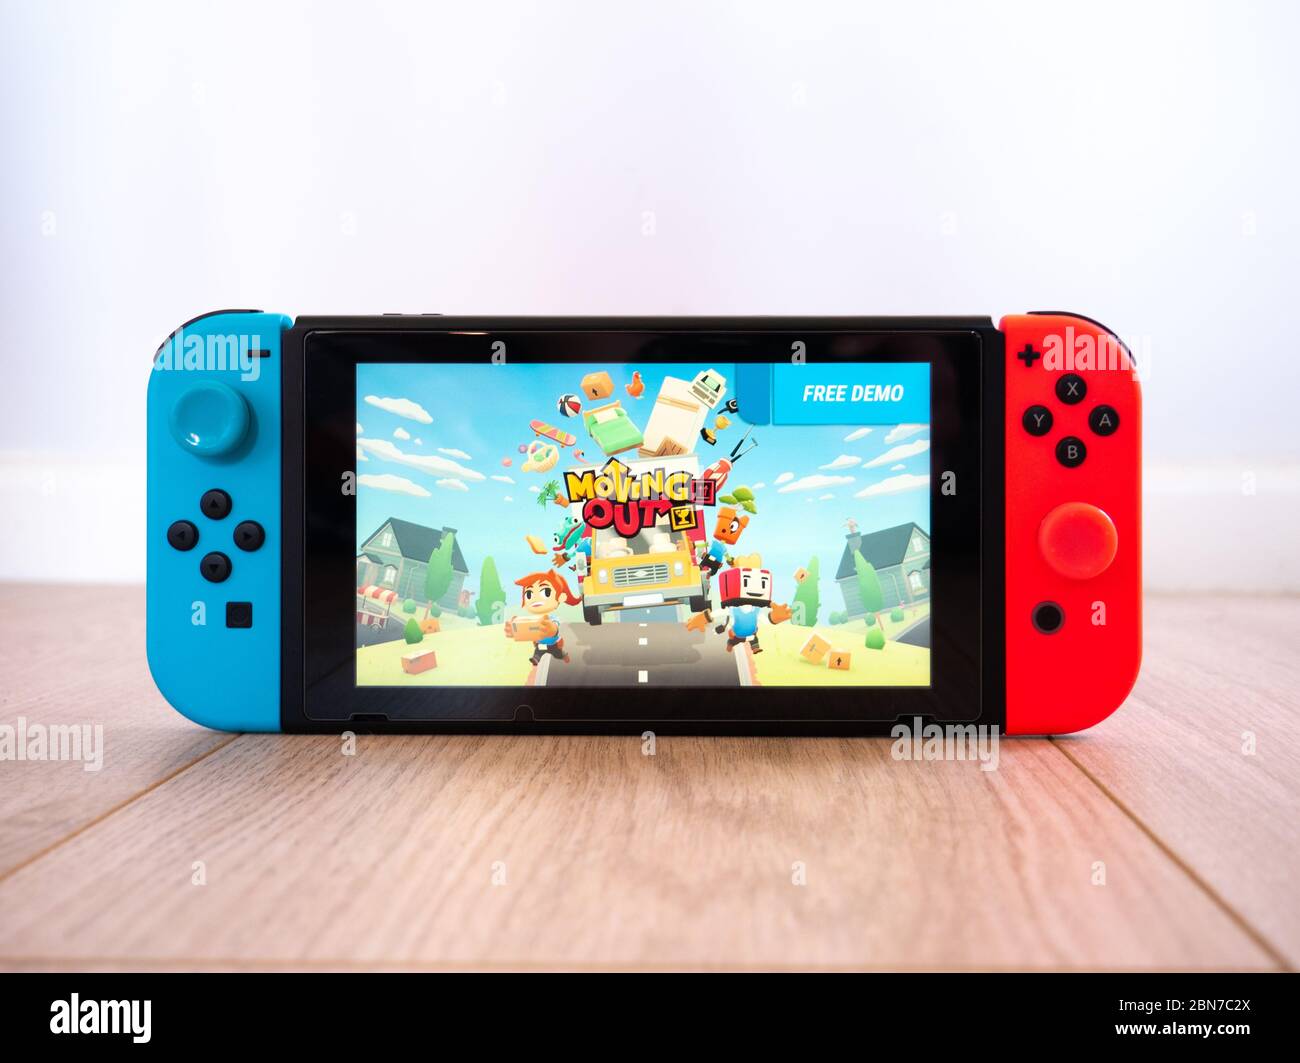 May 2020, UK: Nintendo switch console new Moving Out game by Team 17 studio on white background Stock Photo